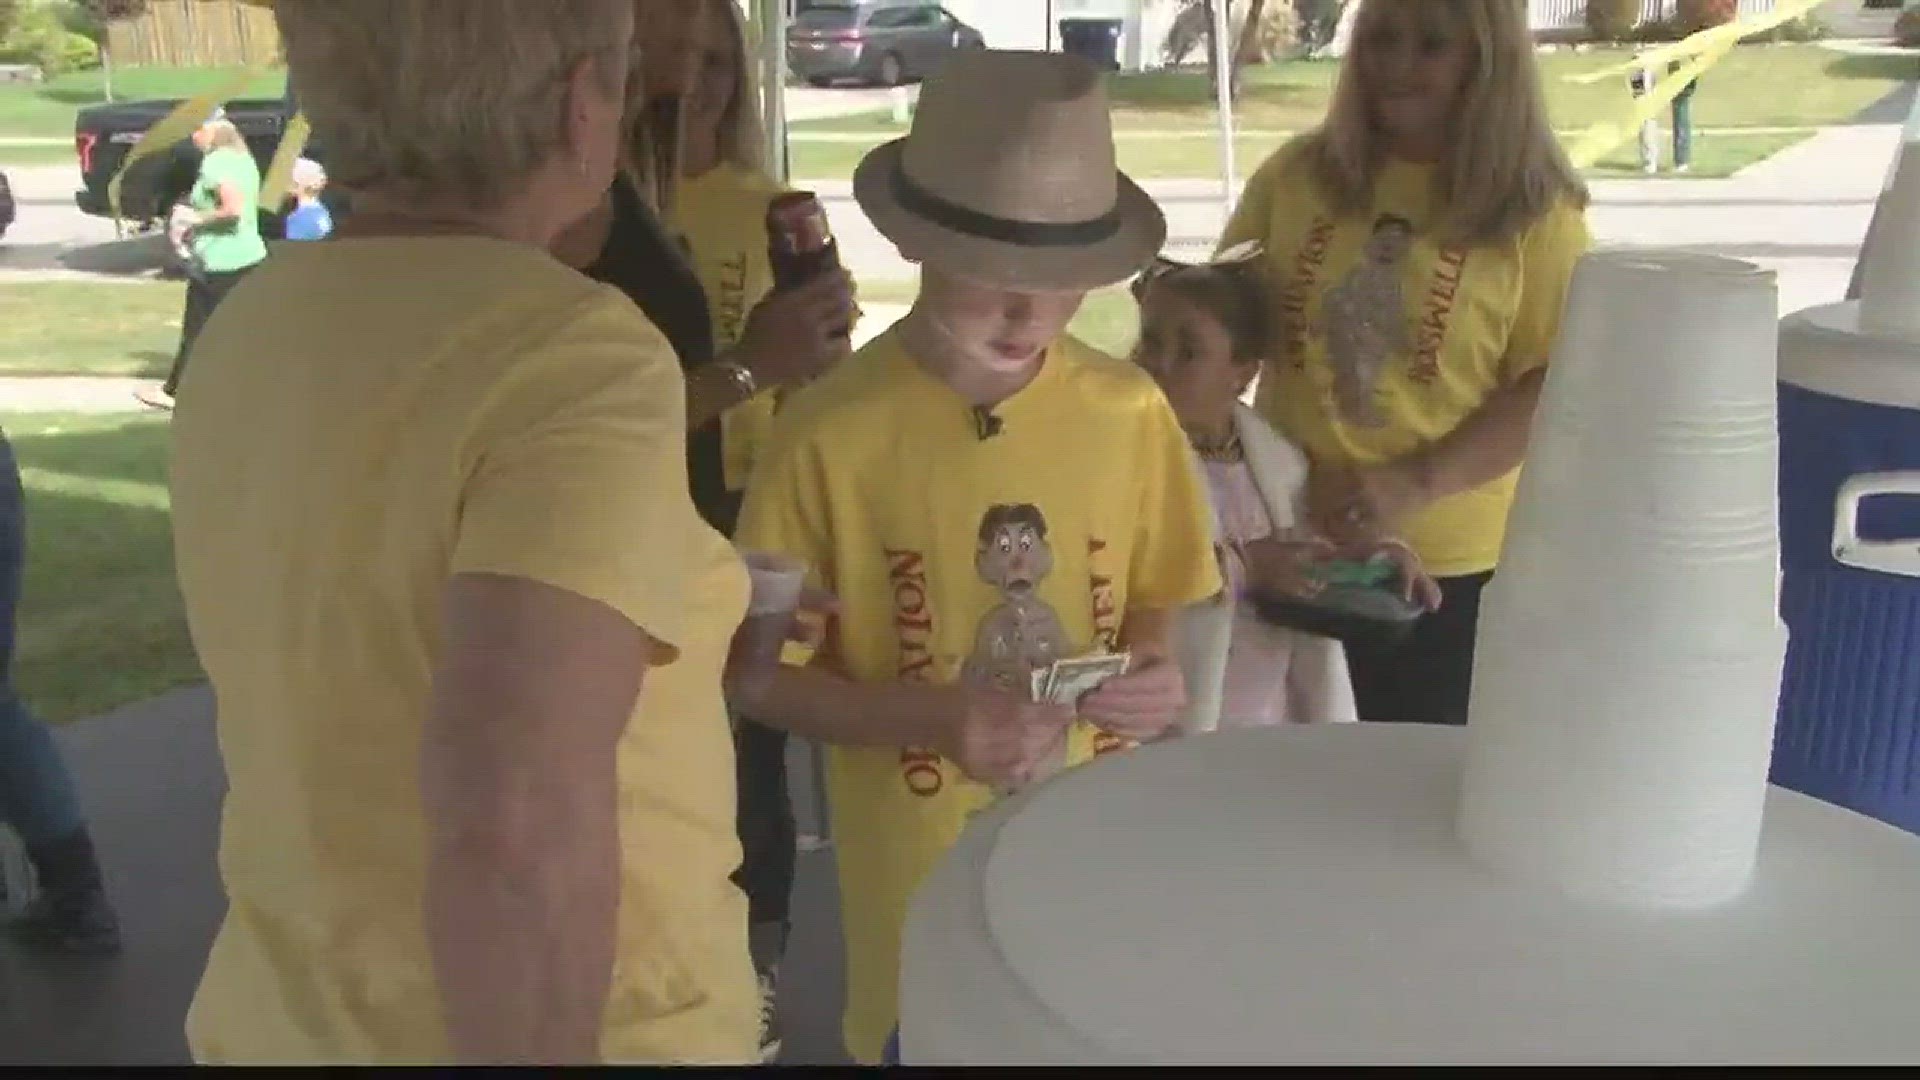 Today we meet a 5th grader from Pinehurst Elementary who is helping kids, one glass of lemonade at a time.